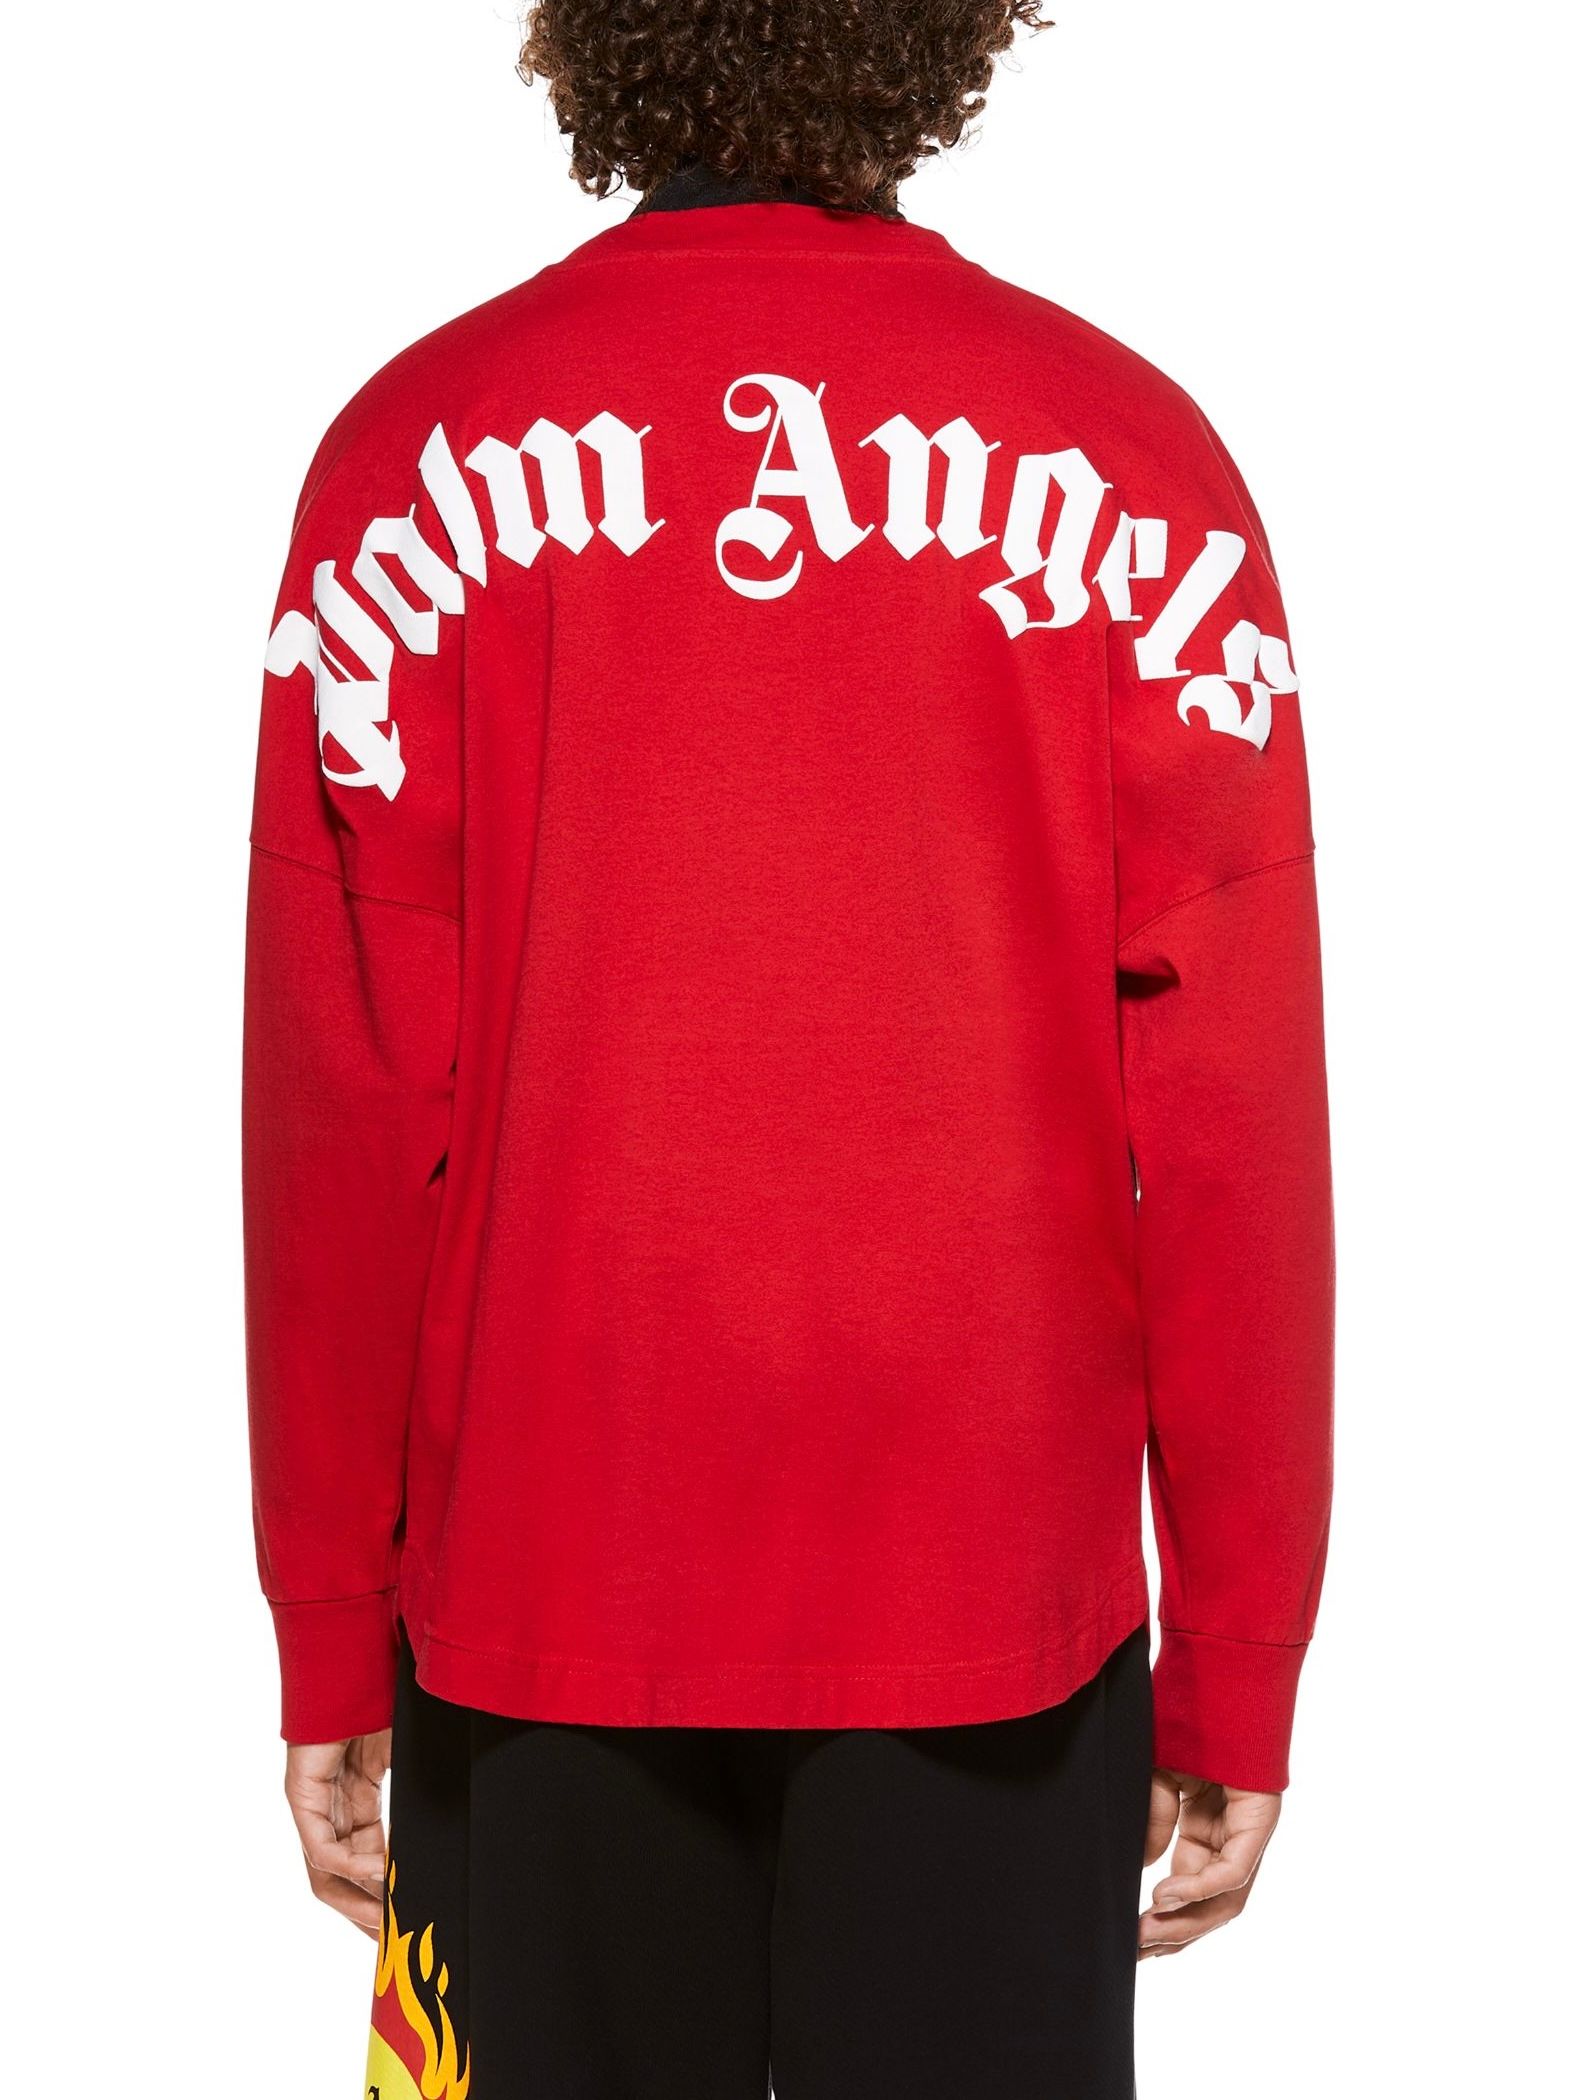 PALM ANGELS - 2021 SS | STORY